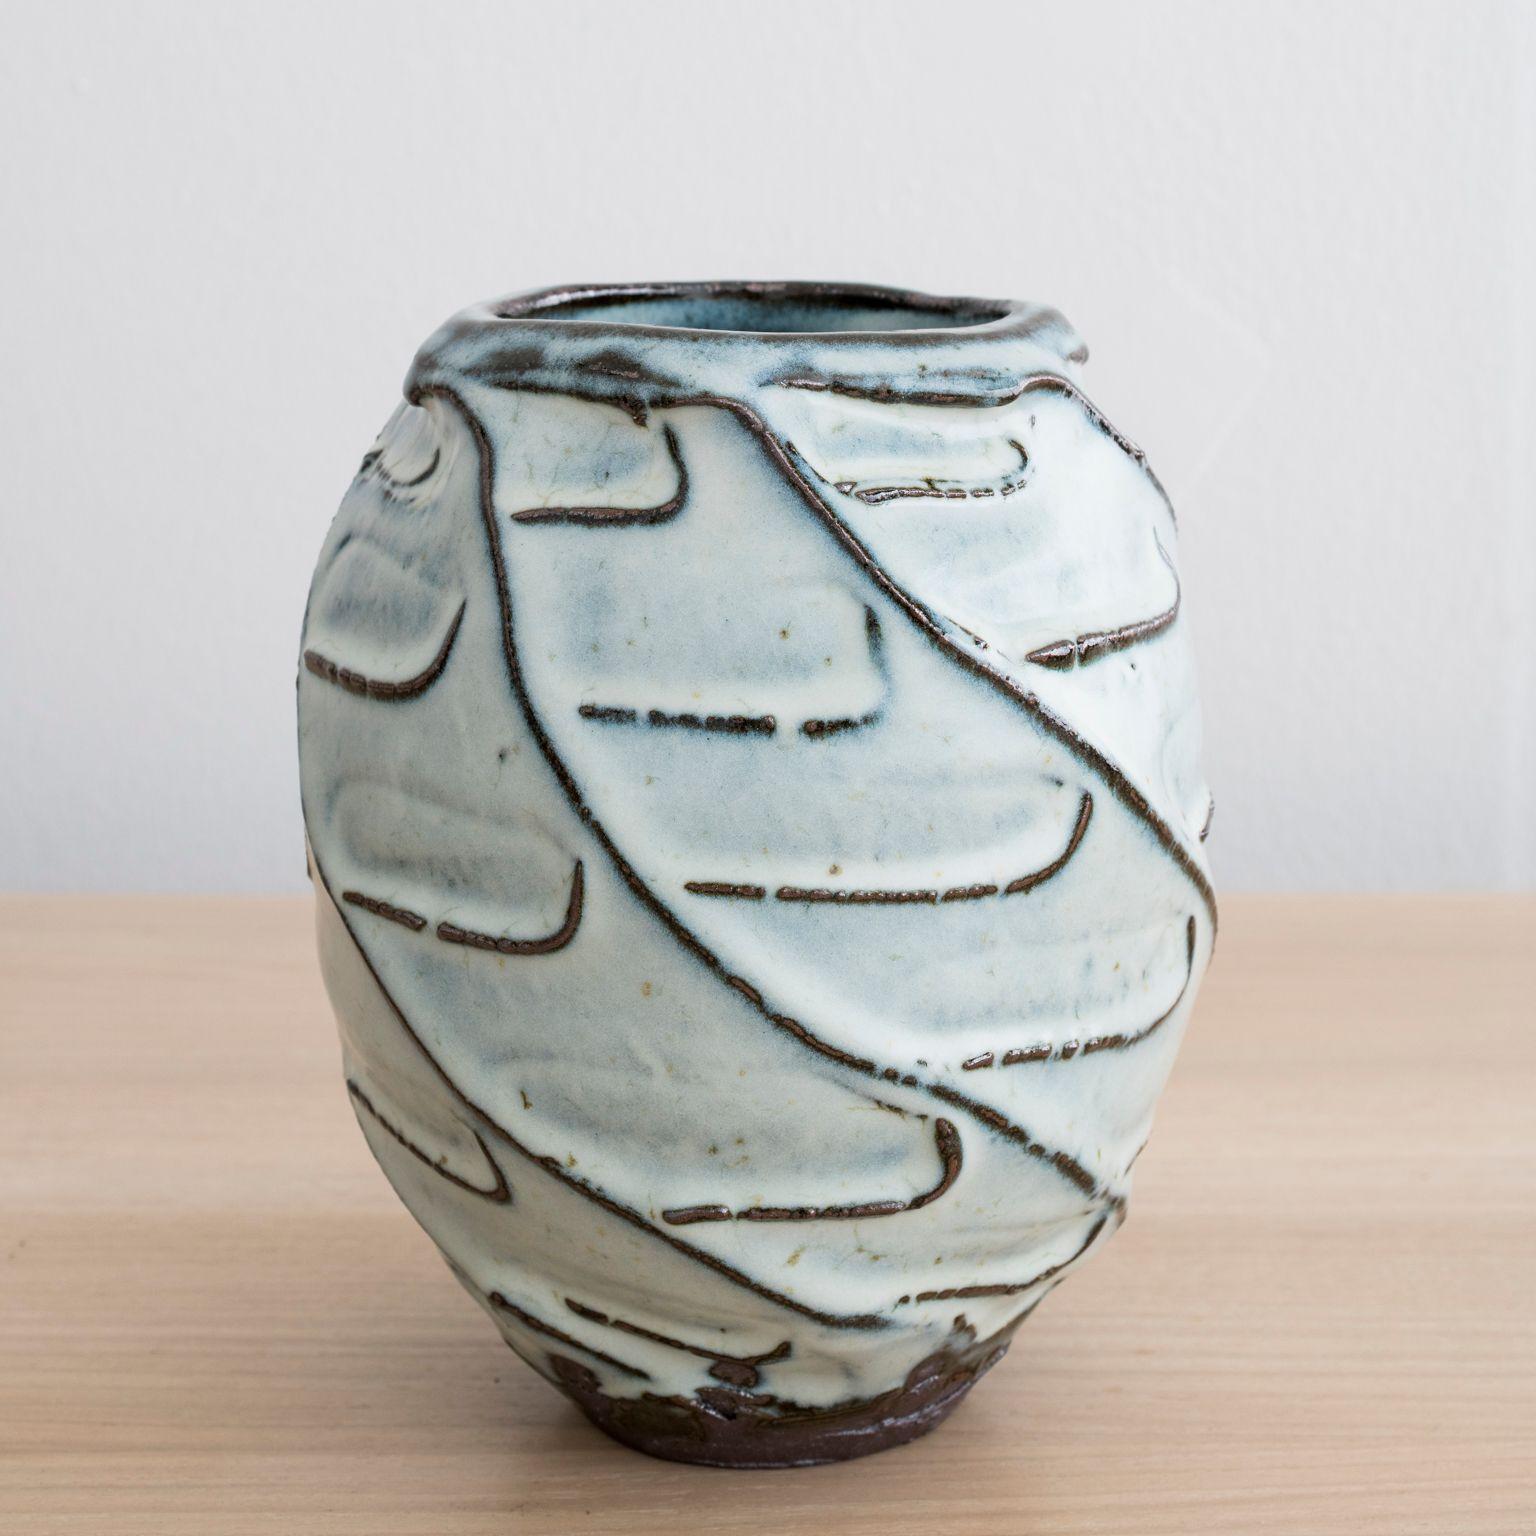 Stoneware vase handmade by Mats Svensson

Black clay with Nuka glaze

Made in Sweden, 2020

Approximately: Height 8 1/2